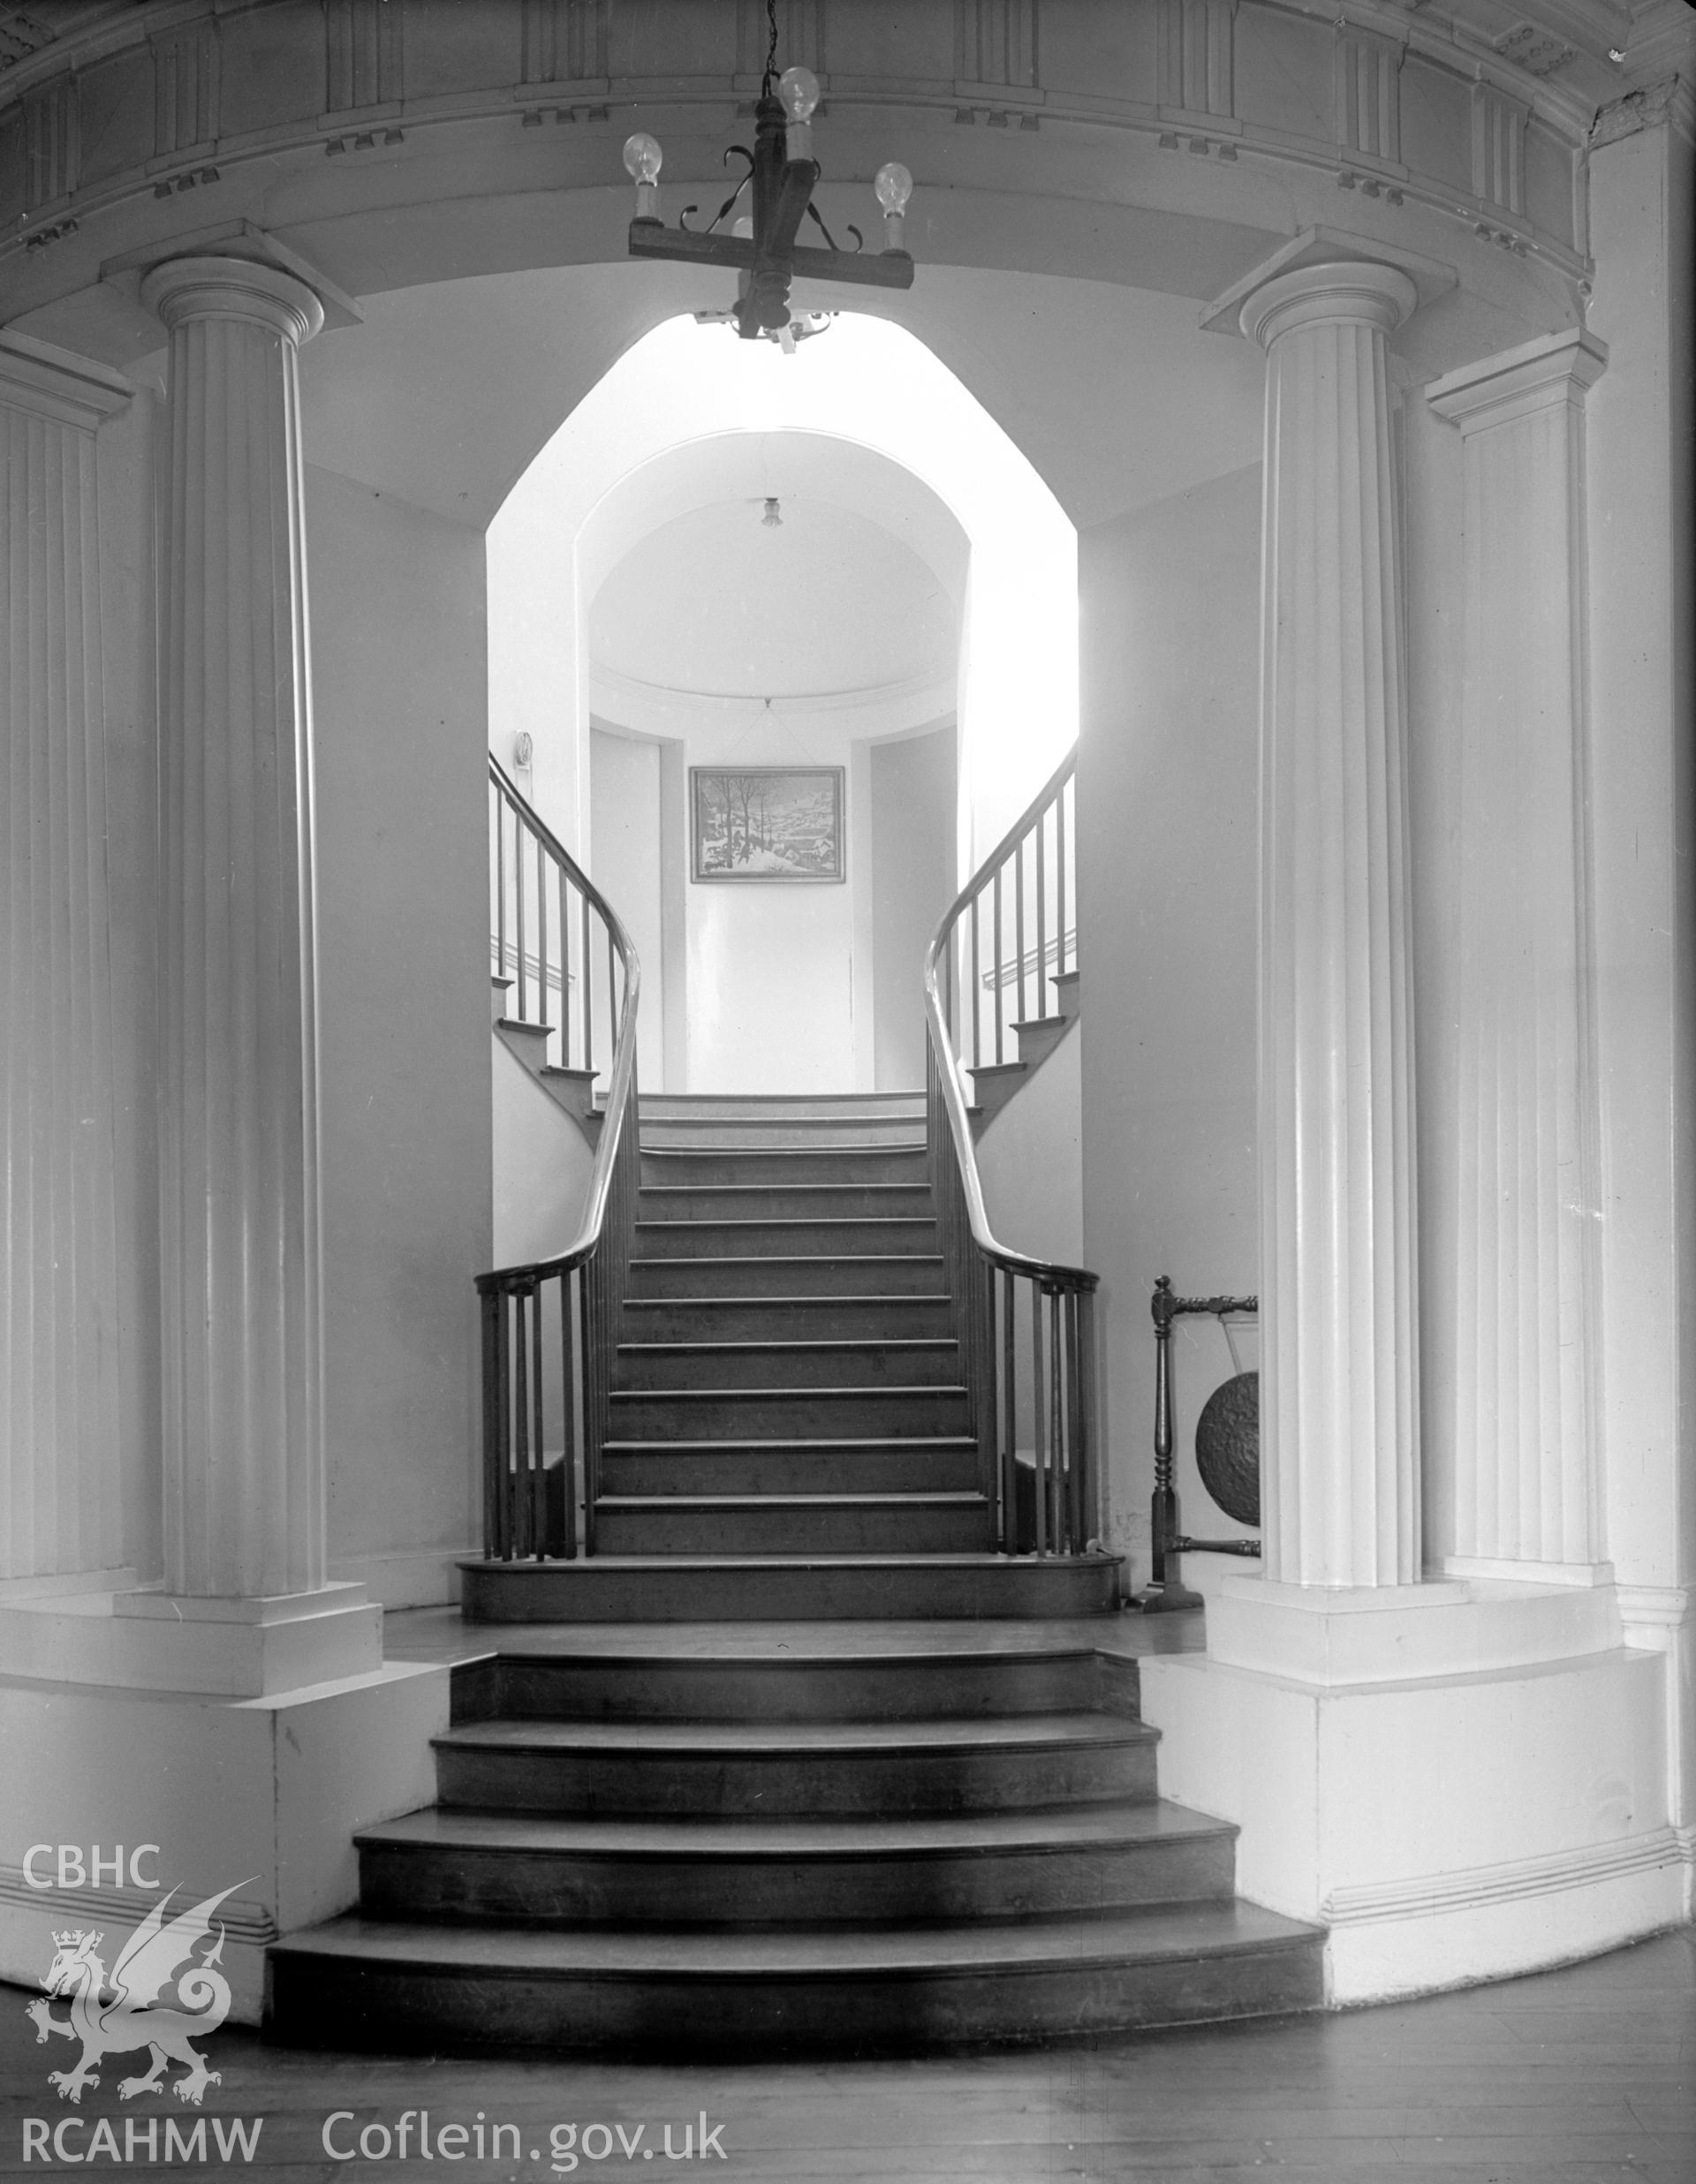 A view the staircase, encased in a small rotunda and lit from a small lantern dome.